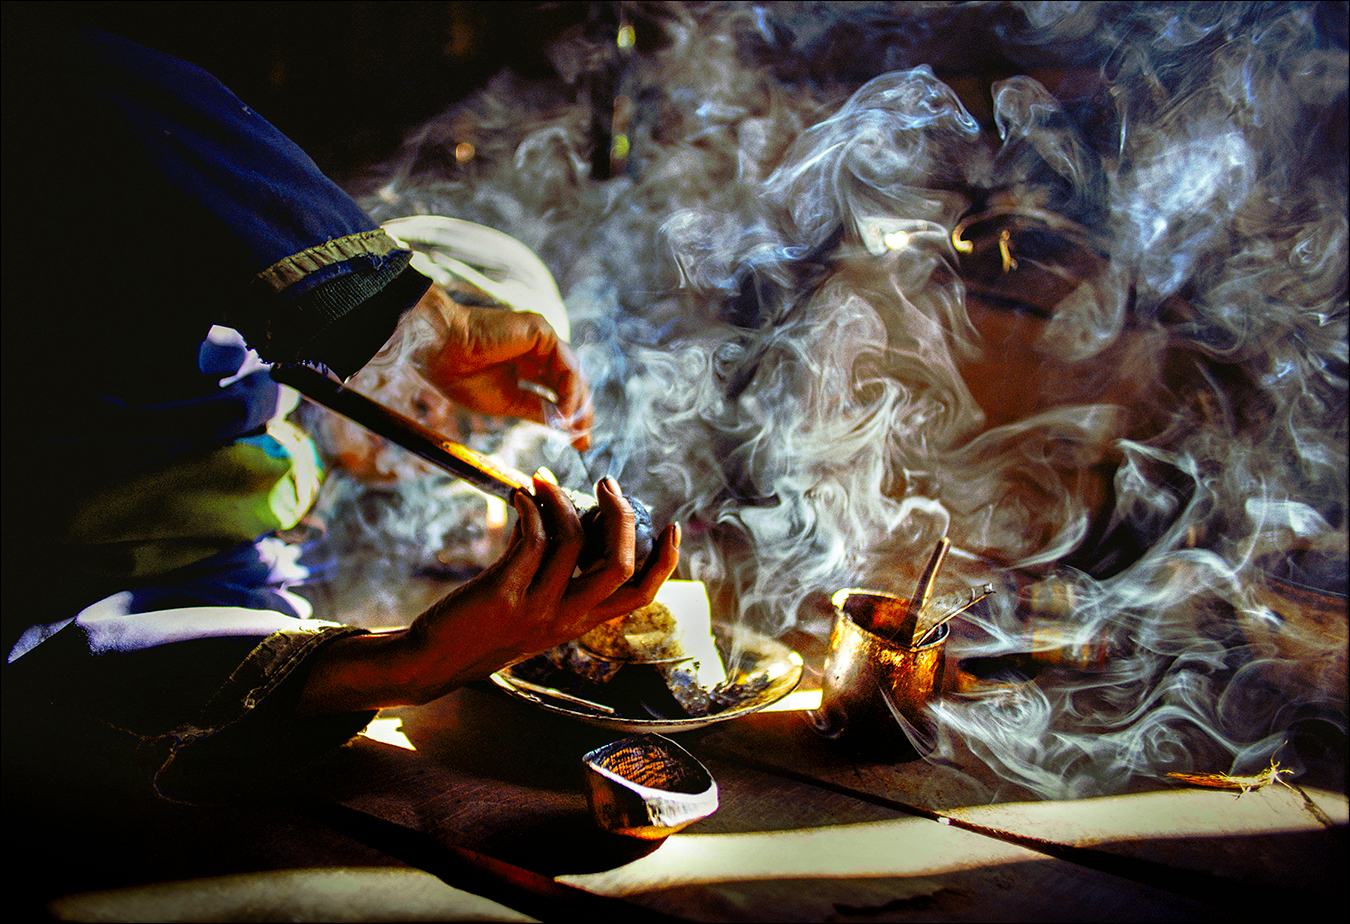 Engulfed in opium smoke, an addict of the Lisu ethnic hill tribe mixes a pipe of the narcotic in a village in the Golden Triangle of Southeast Asia, where Thailand, Laos, and Myanmar meet. The Golden Triangle was the largest supplier of opium in the world, but the region has since been eclipsed by the Golden Crescent — the poppy-growing area in and around Afghanistan. | © Steve Raymer / National Geographic Creative